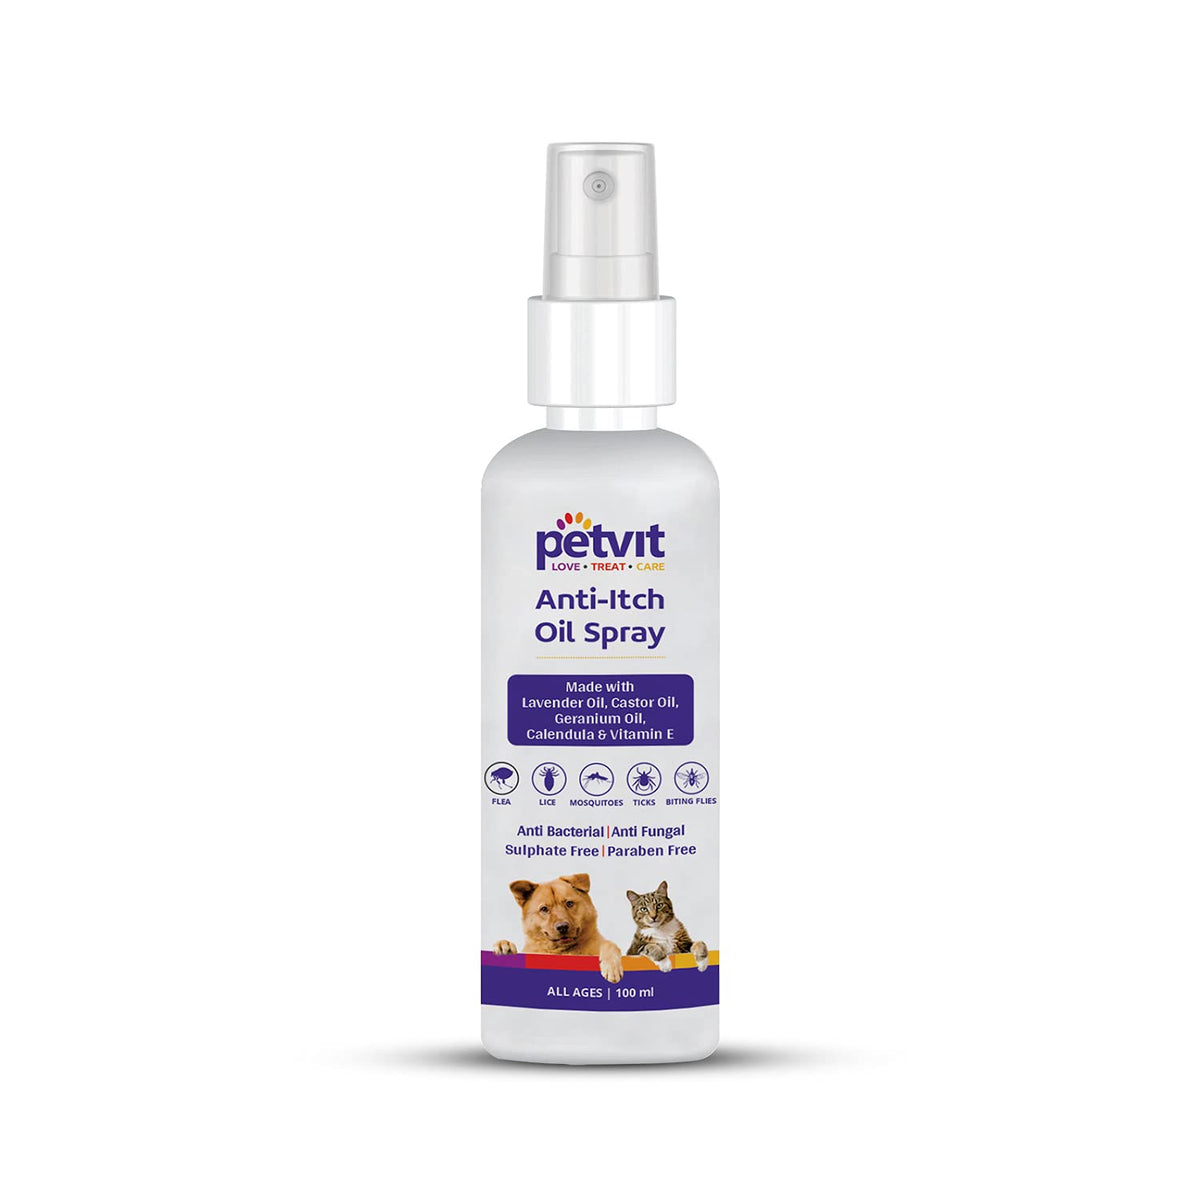 Petvit Anti-Itch Oil Spray - Soothes Itching and Redness | Dogs and Cats | Vitamin E, Lavender Oil & Castor Oil | (100ml) For All Breeds